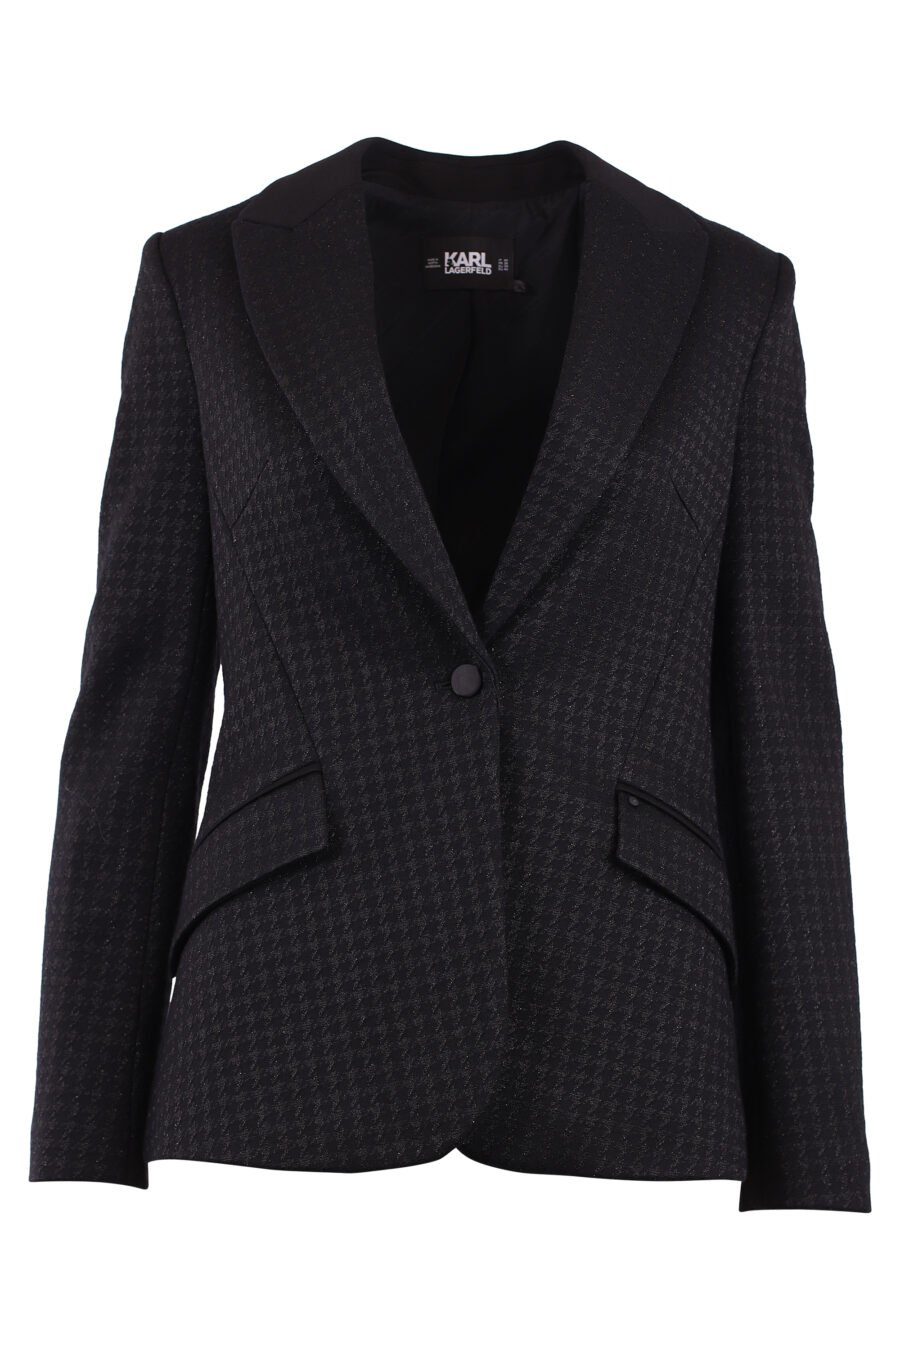 Black knitted blazer with glitter - IMG 6220